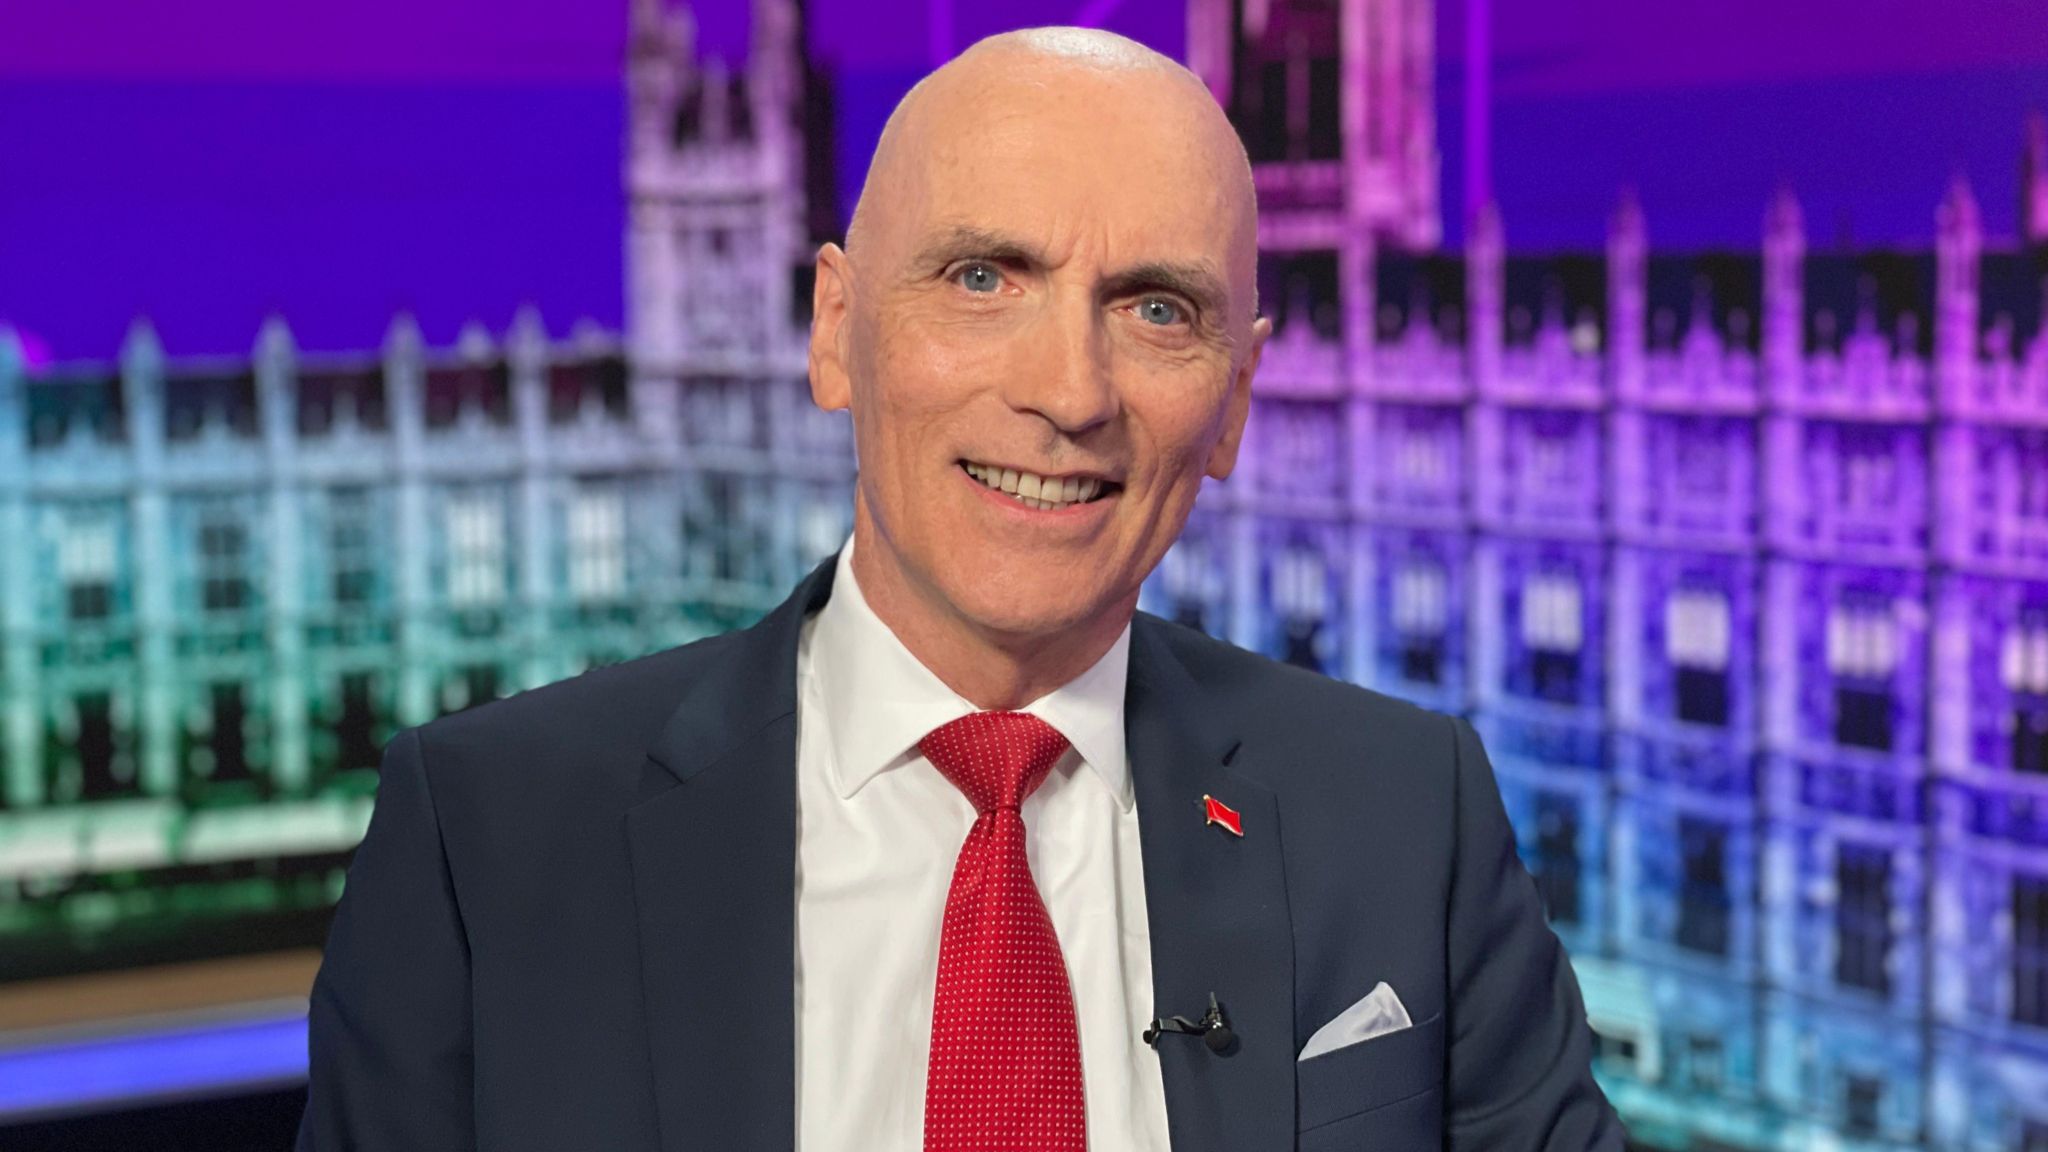 Workers Party of Great Britain candidate, Chris Williamson